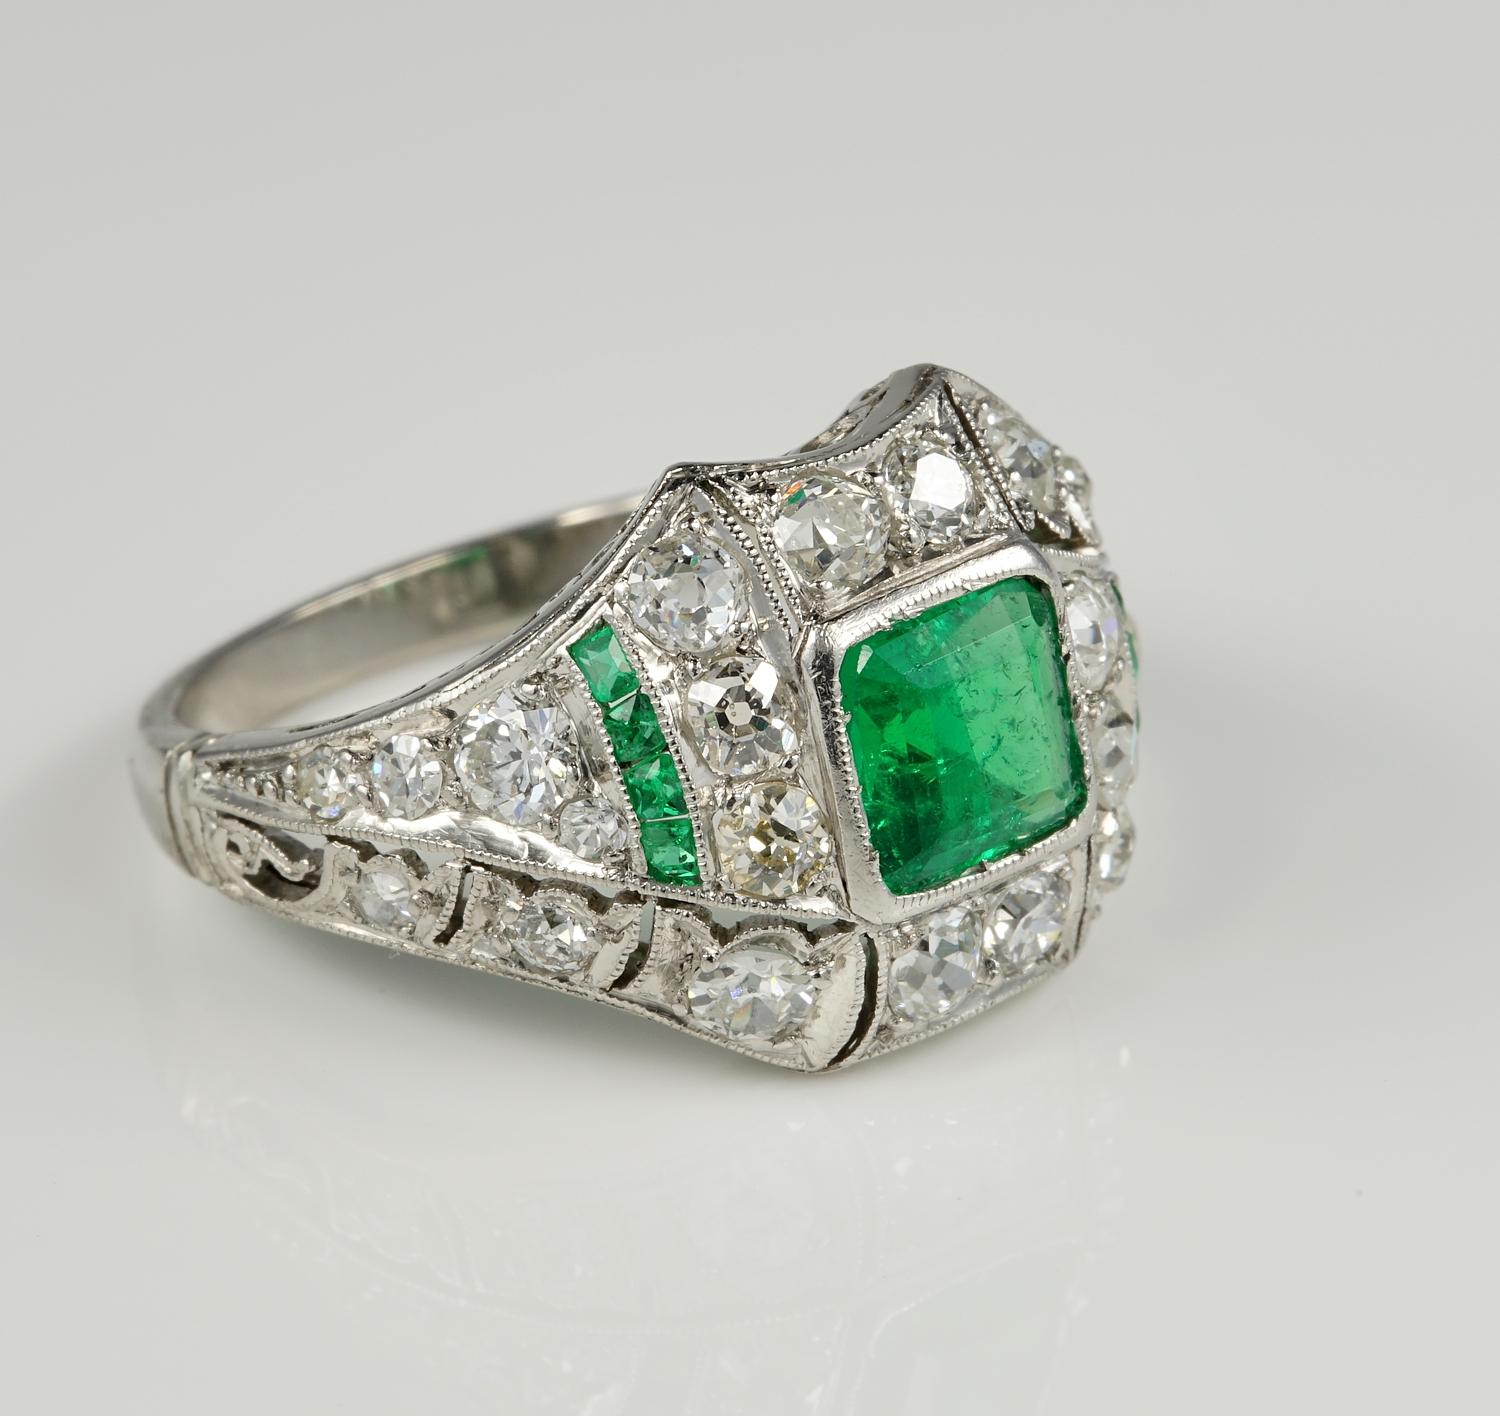 Distinctive and stunning purest Art Deco Colombian Emerald and Diamond ring.
With an intricately designed mounting all of solid Platinum boasting magnificent workmanship of the Deco era.
A Play of geometric lines between gemstones makes this ring